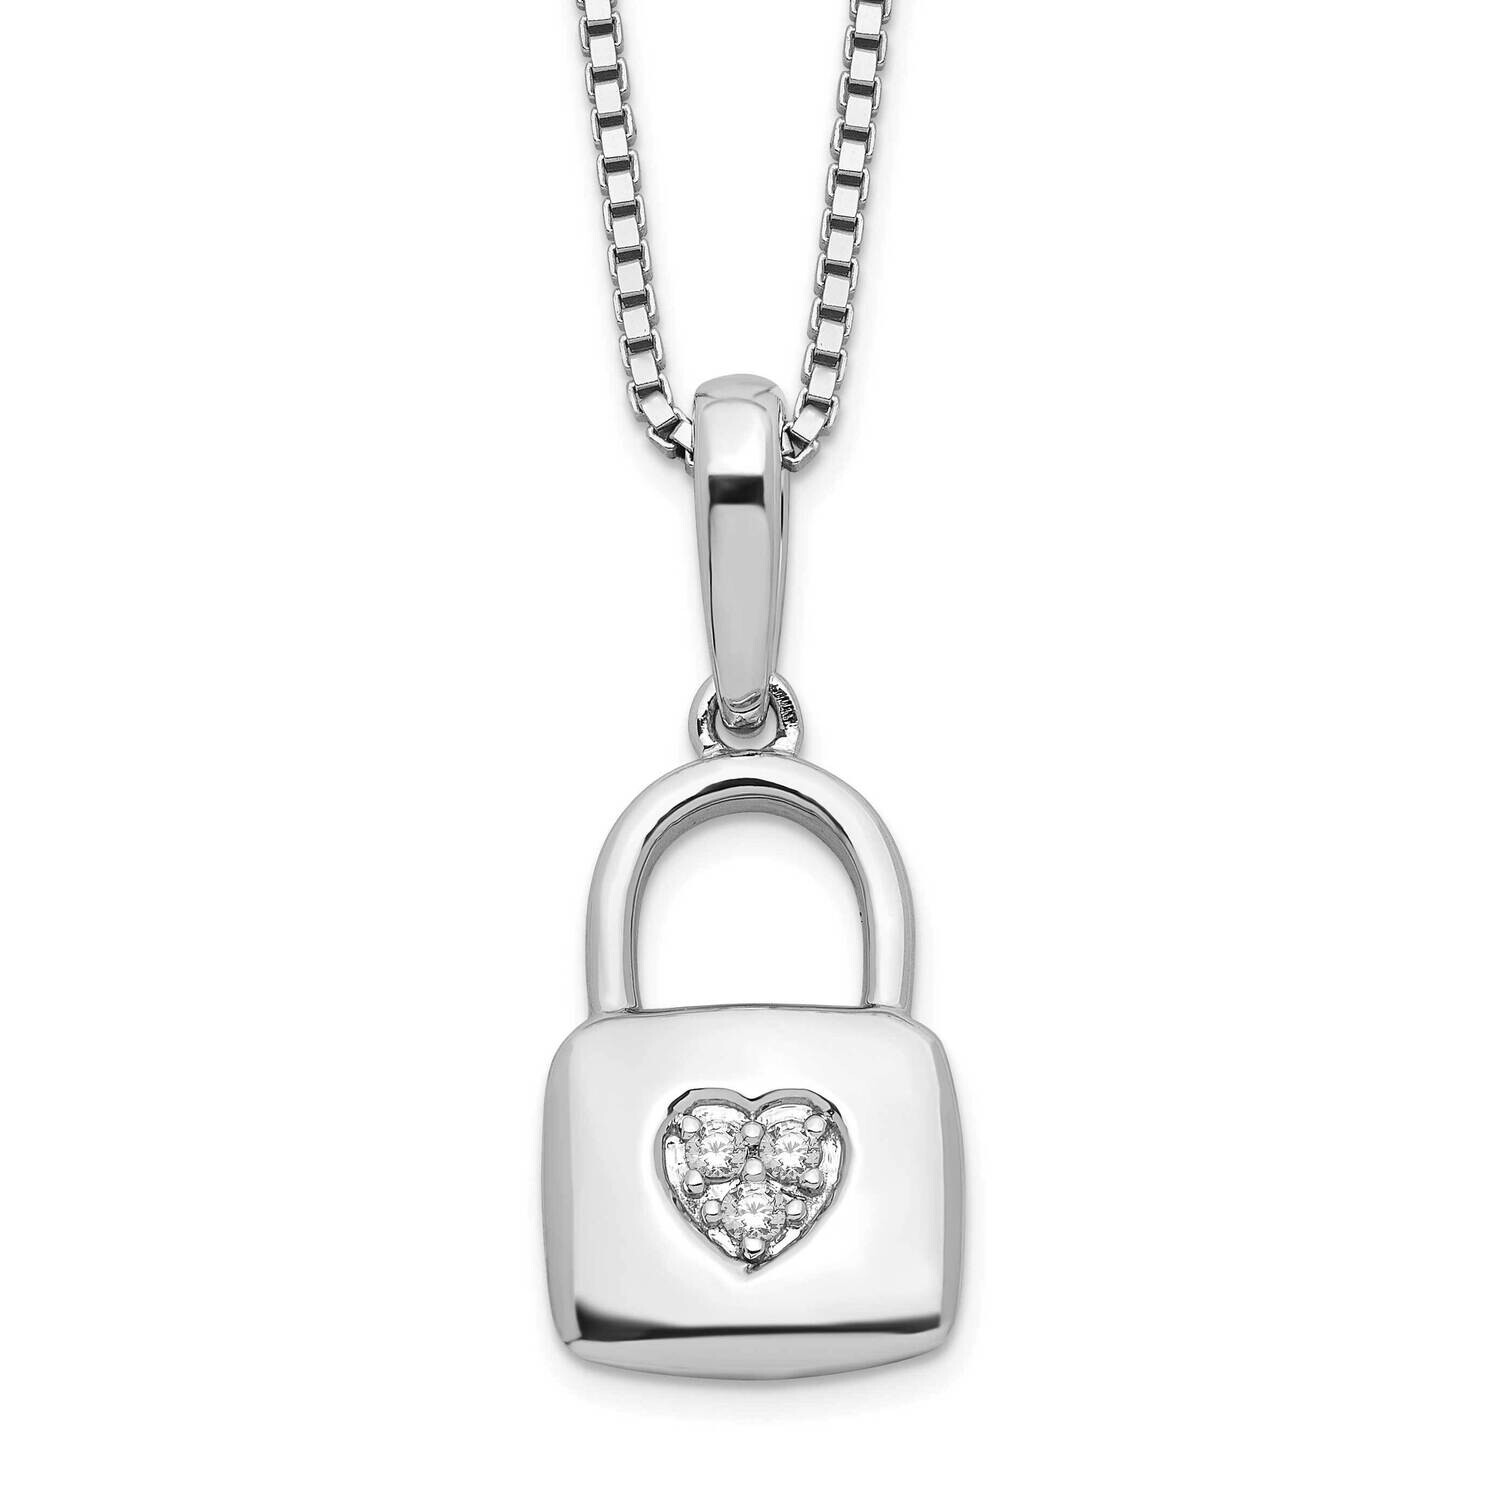 White Ice 18 Inch Diamond Heart Lock Necklace 2 Inch Extender Sterling Silver Rhodium-Plated QW527-18